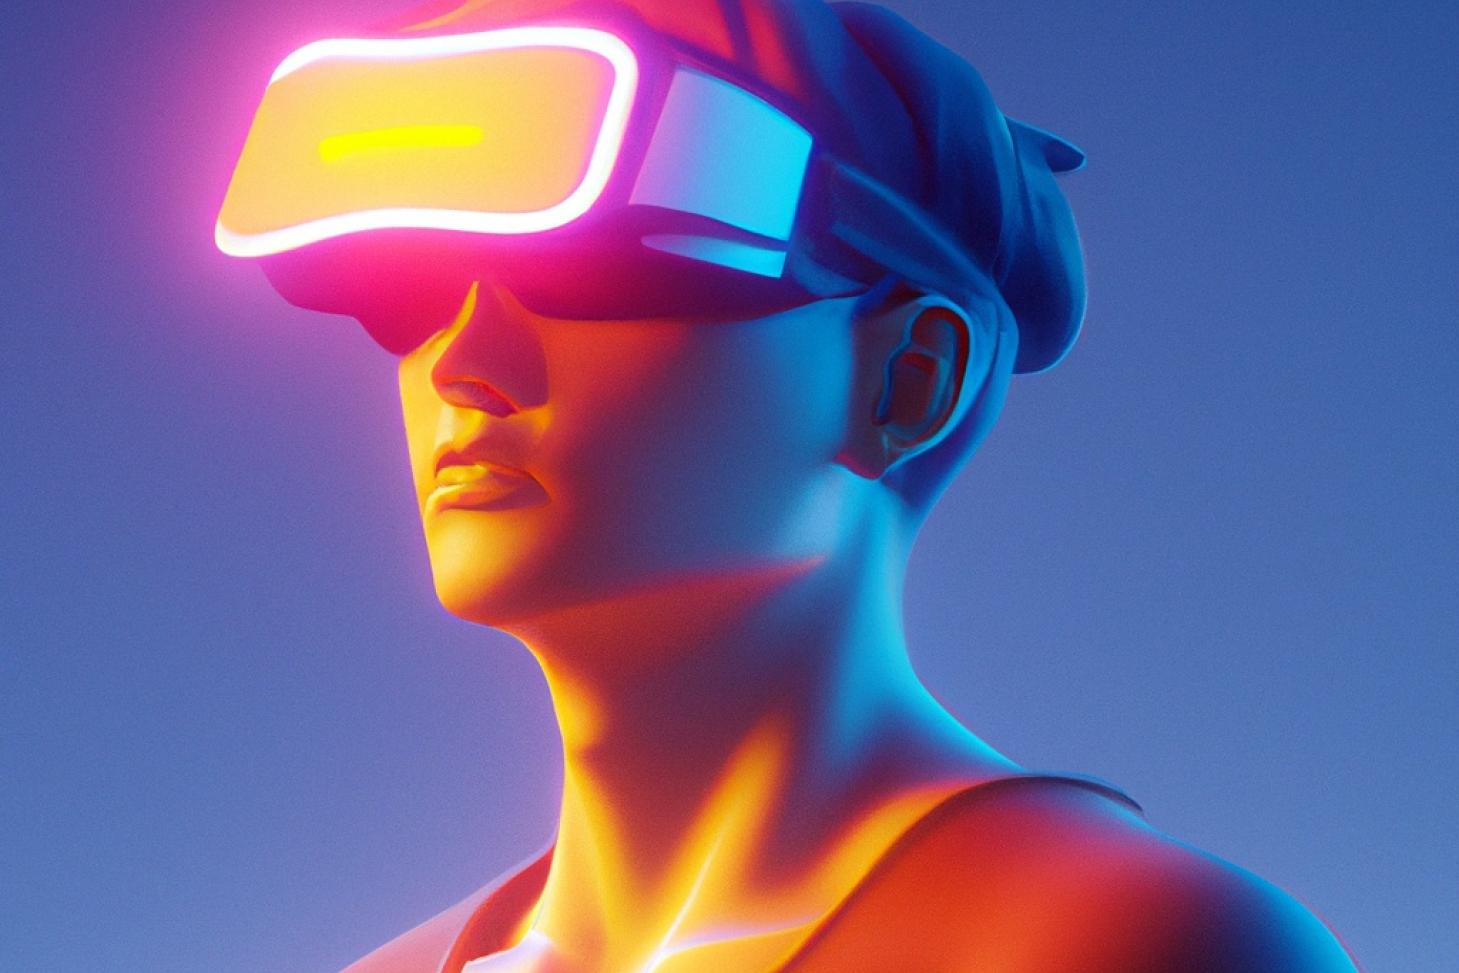 A New Vision of the Digital Future